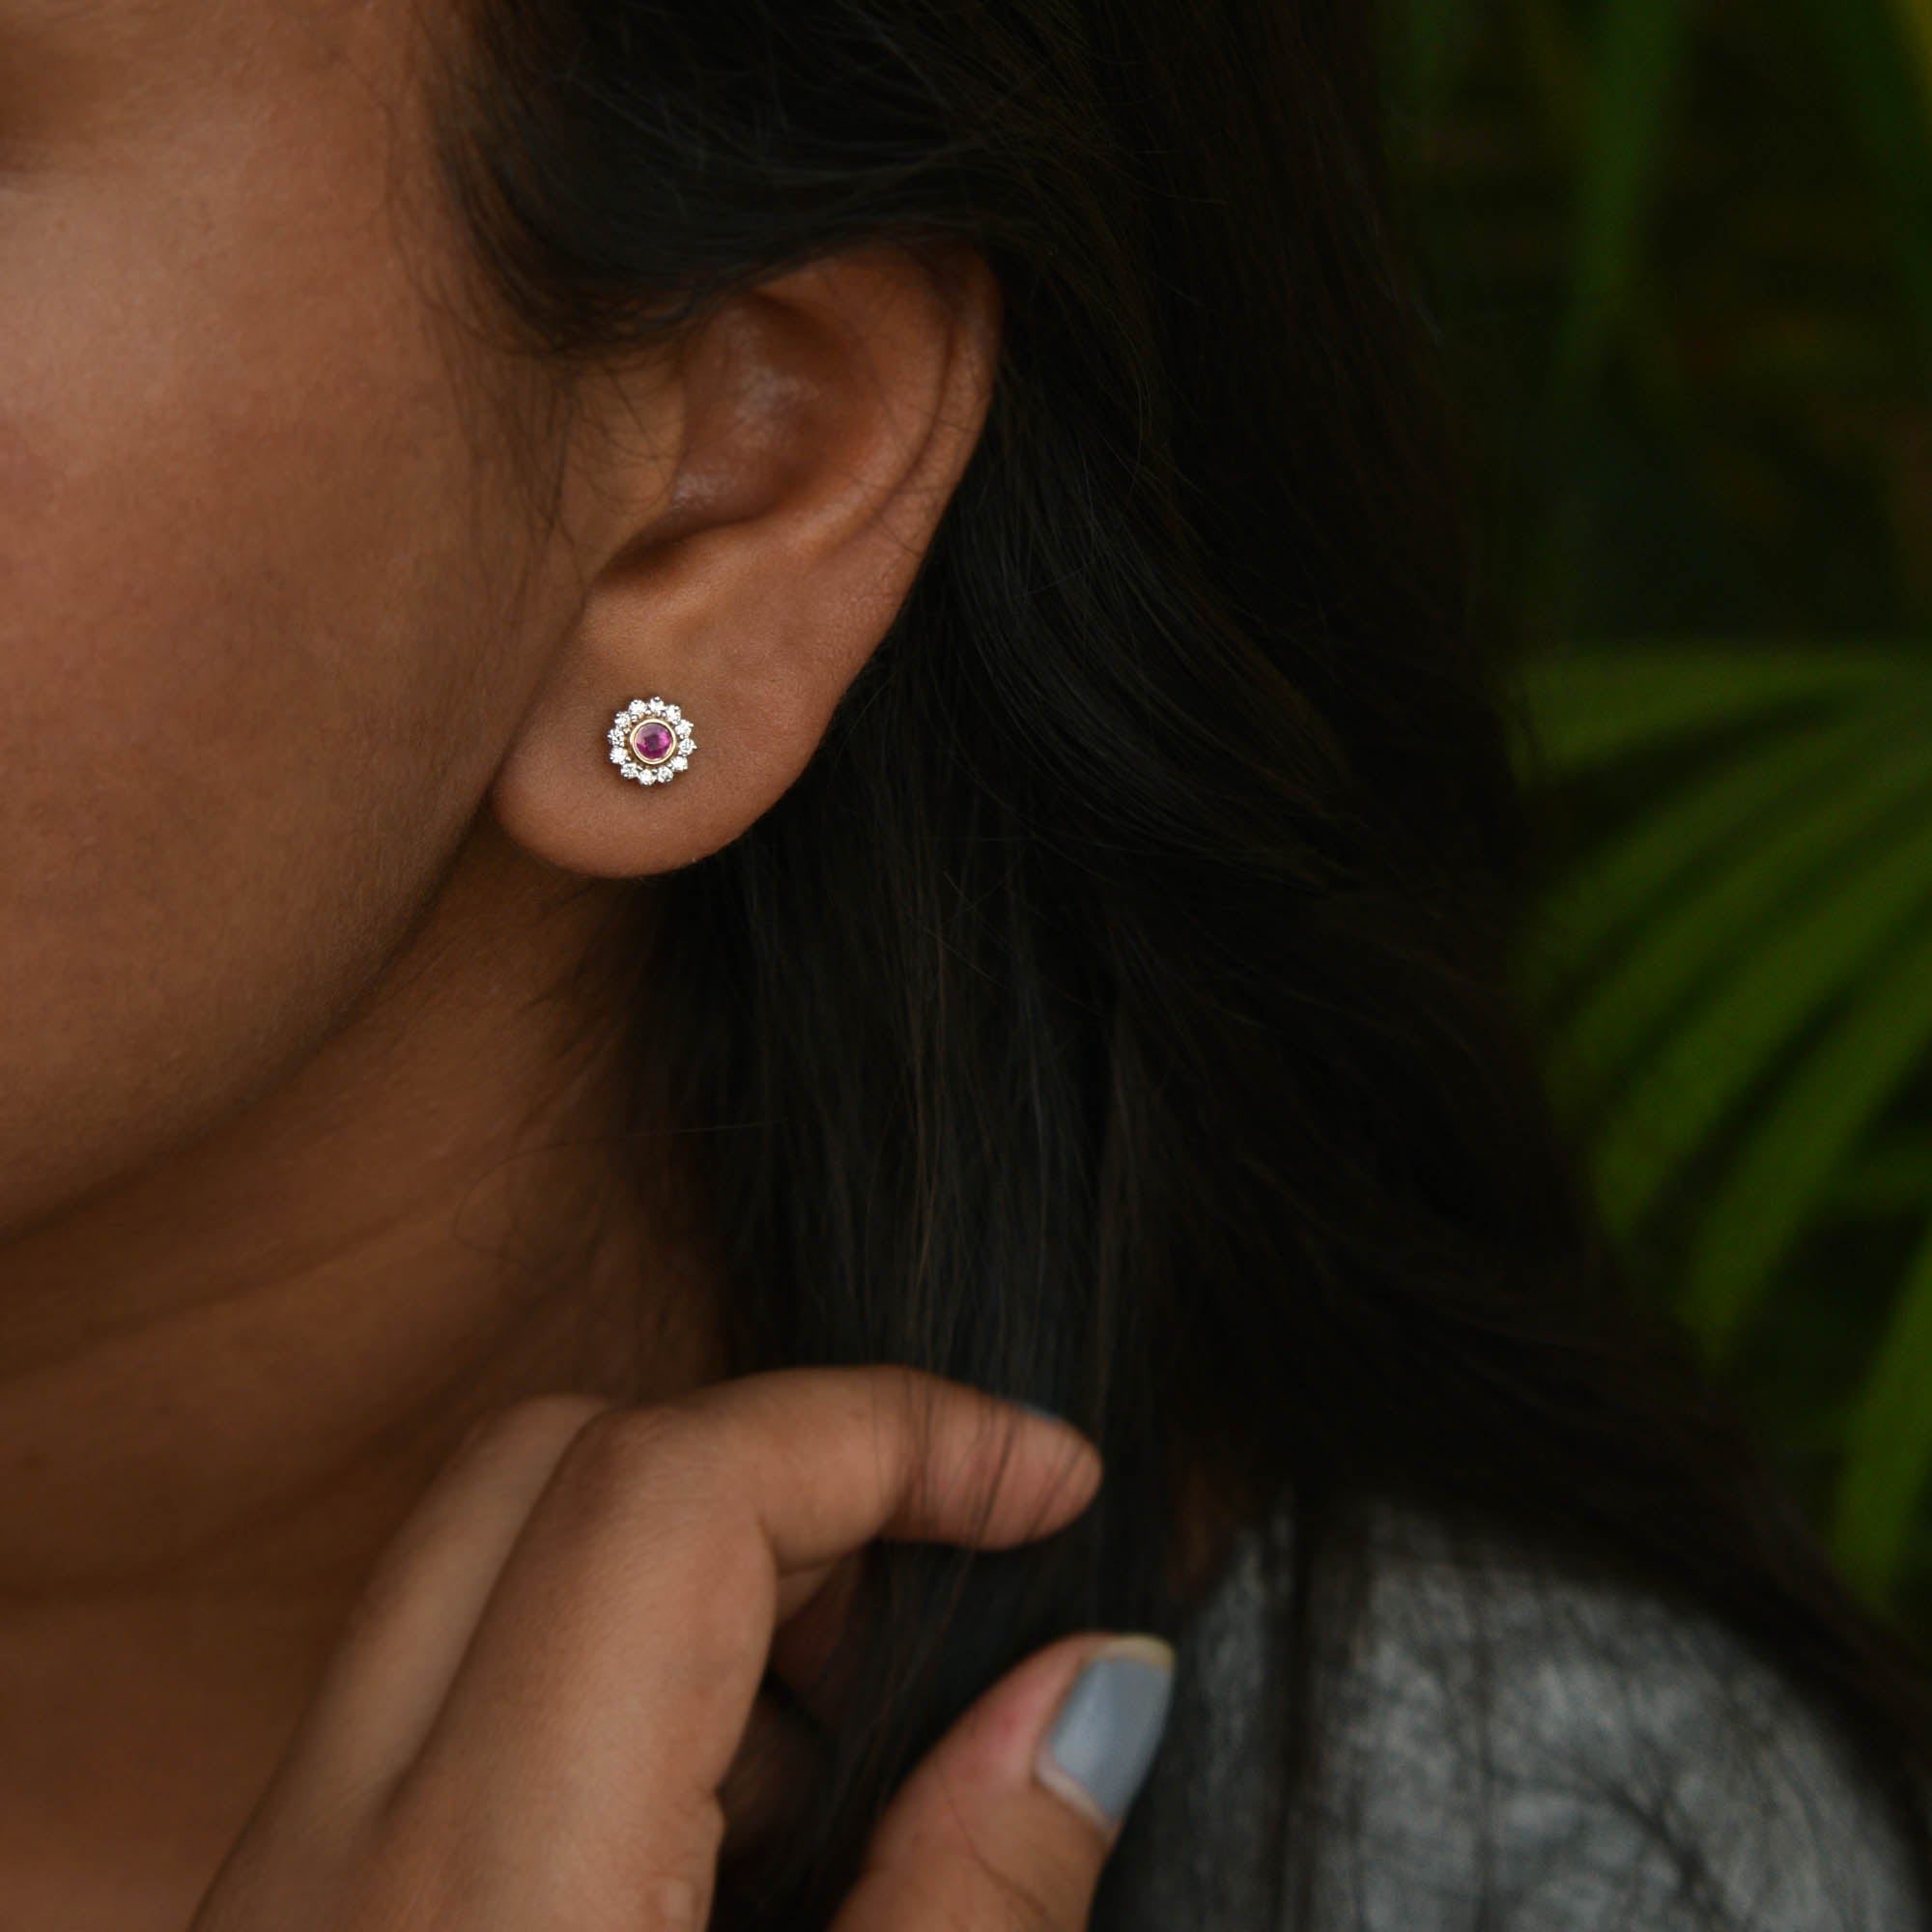 My piercing experience! | Gallery posted by Safna Suhood | Lemon8